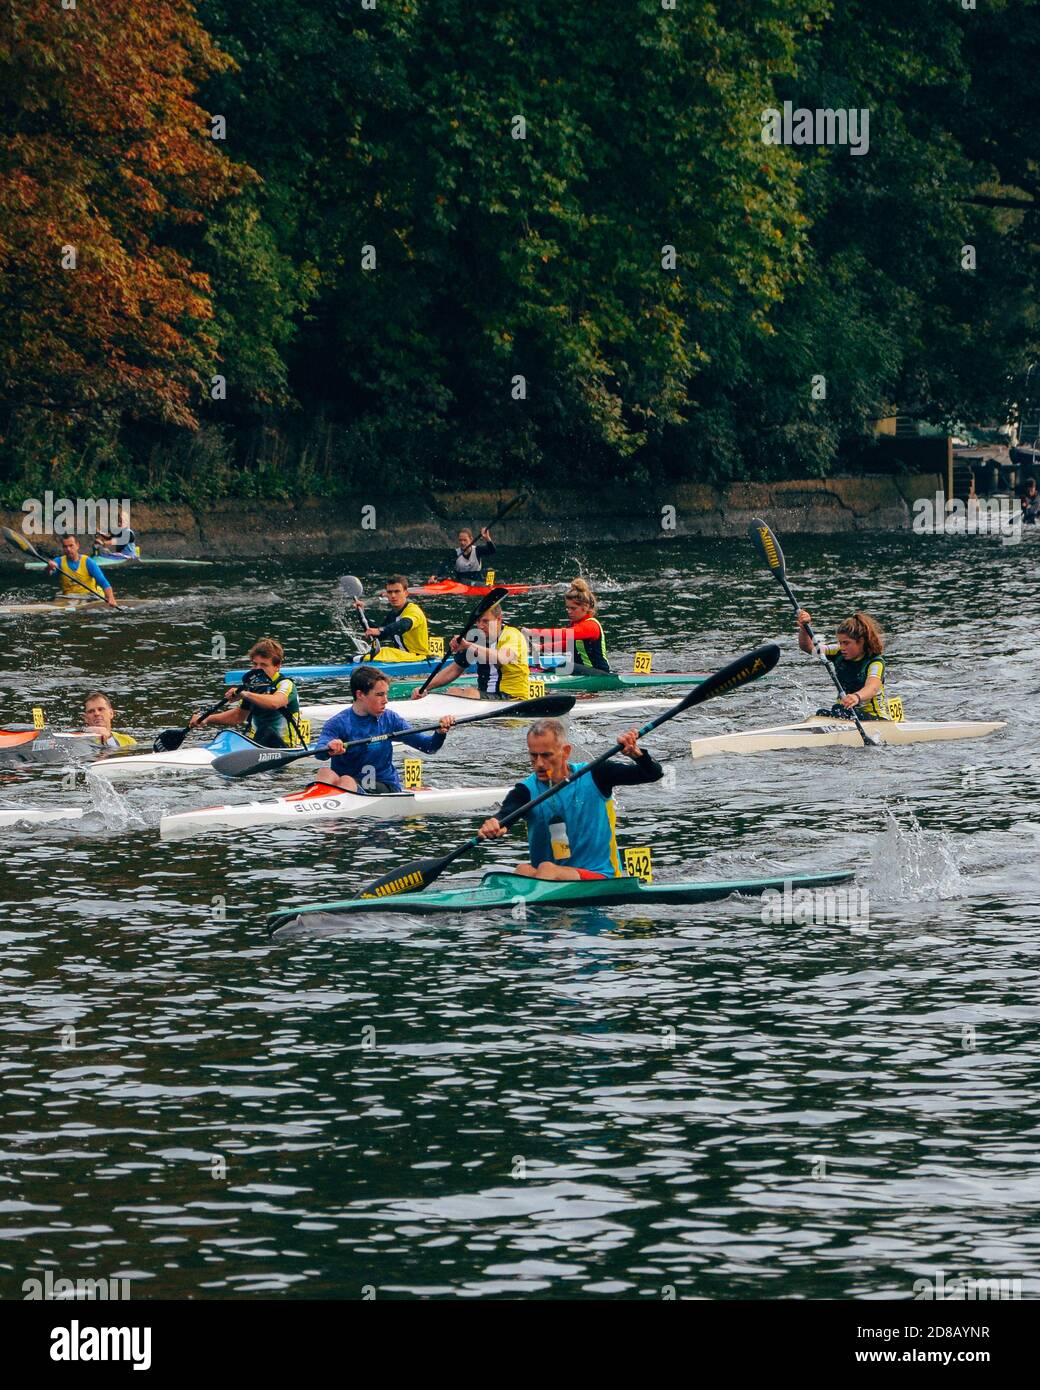 RICHMOND, UNITED KINGDOM - Oct 19, 2020: Photos from the Hasler Final Marathon Kayaking Canoeing National Championships in Richmond, UK. Competition r Stock Photo